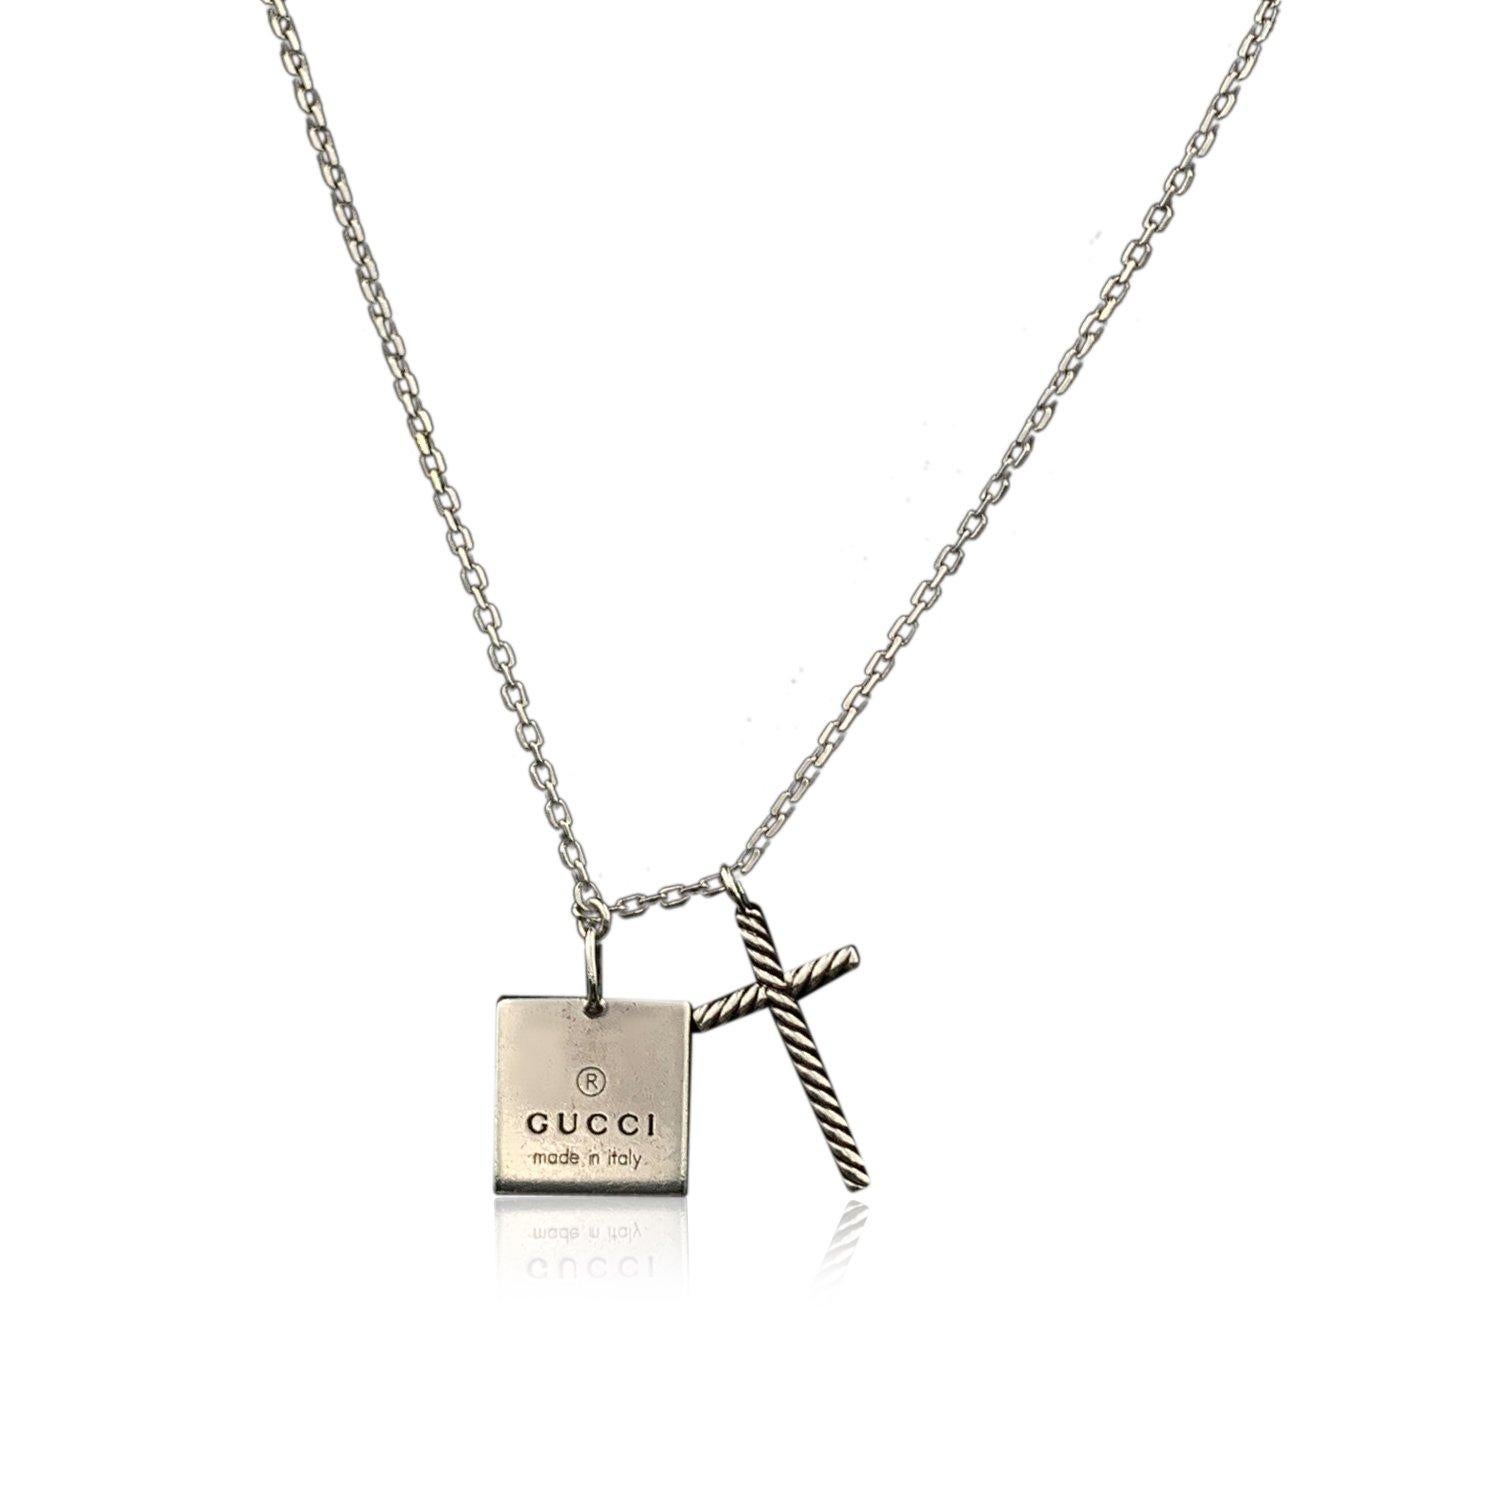 Classic unisex chain necklace by Gucci. Made in sterling silver. Square logo pendant and cross pendant. Lobster closure. Total length of the chain: 18.5 inches - 45.7 cm .'Gucci - made in Italy' engraved on the pendant. 'Ag925' hallmark engraved on